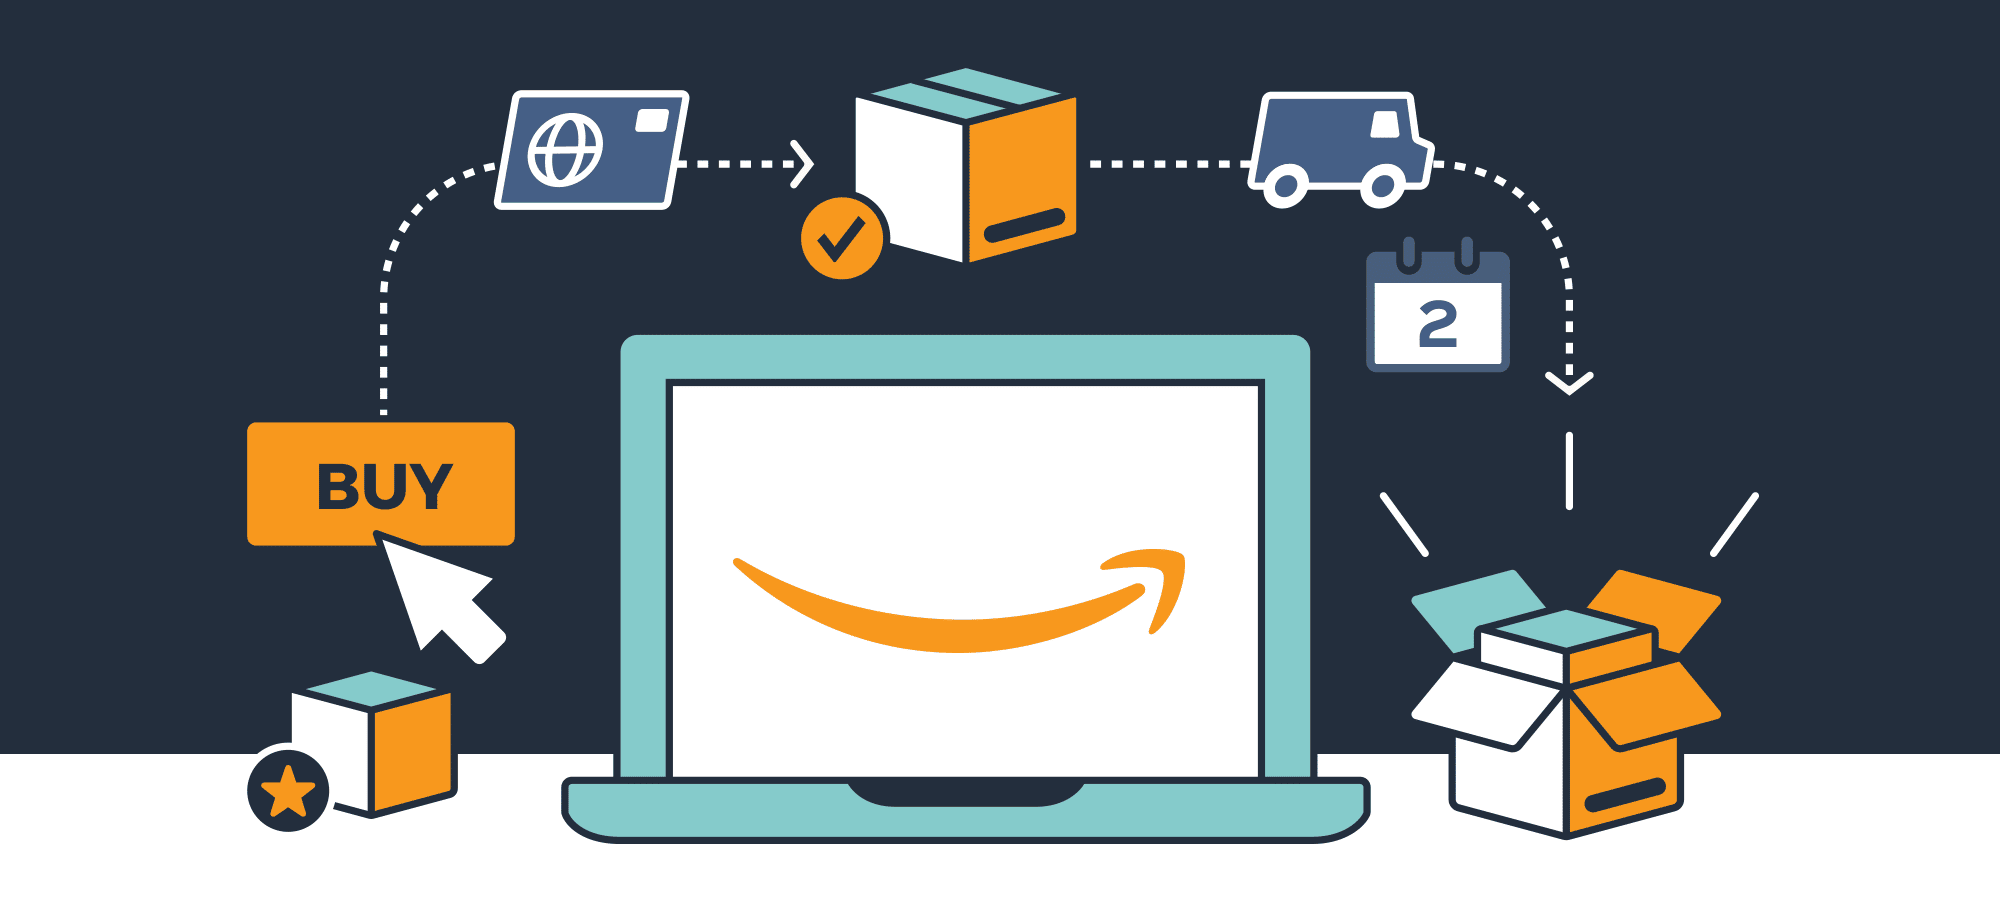 Ultimate Guide] How to Sell Products on Amazon FBA